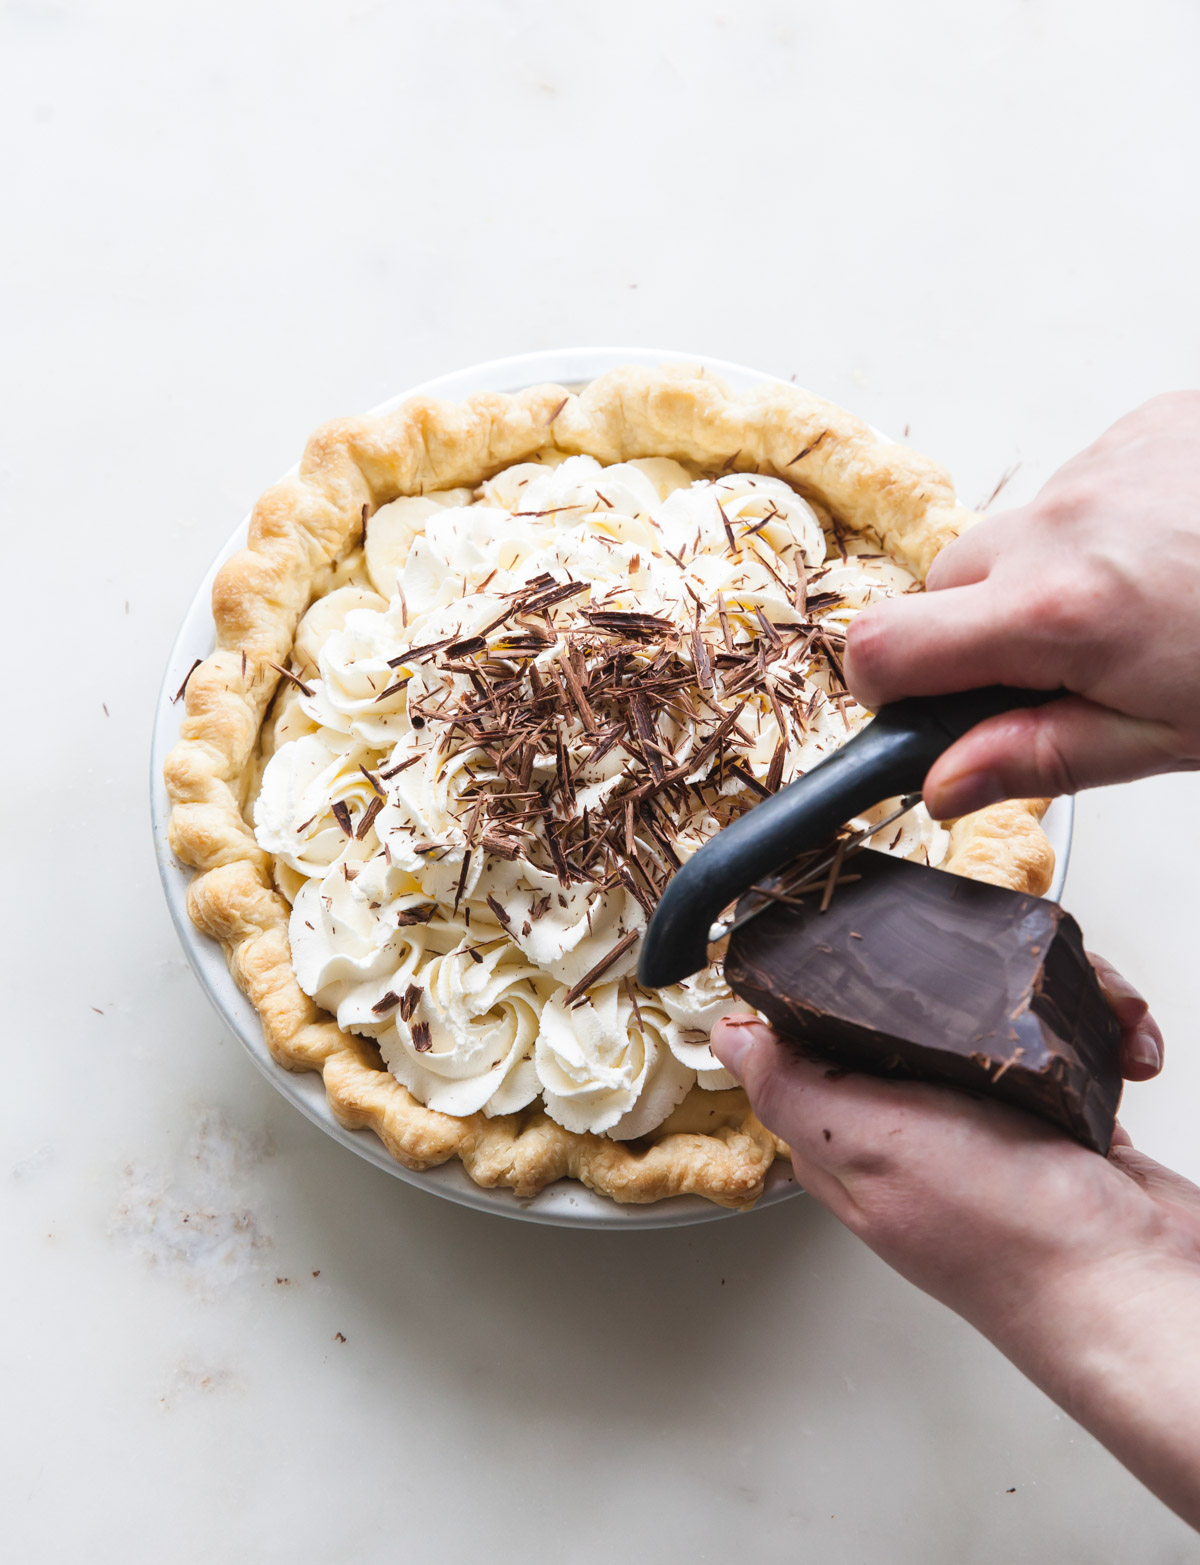 Chocolate shavings being grated on a banana cream pie